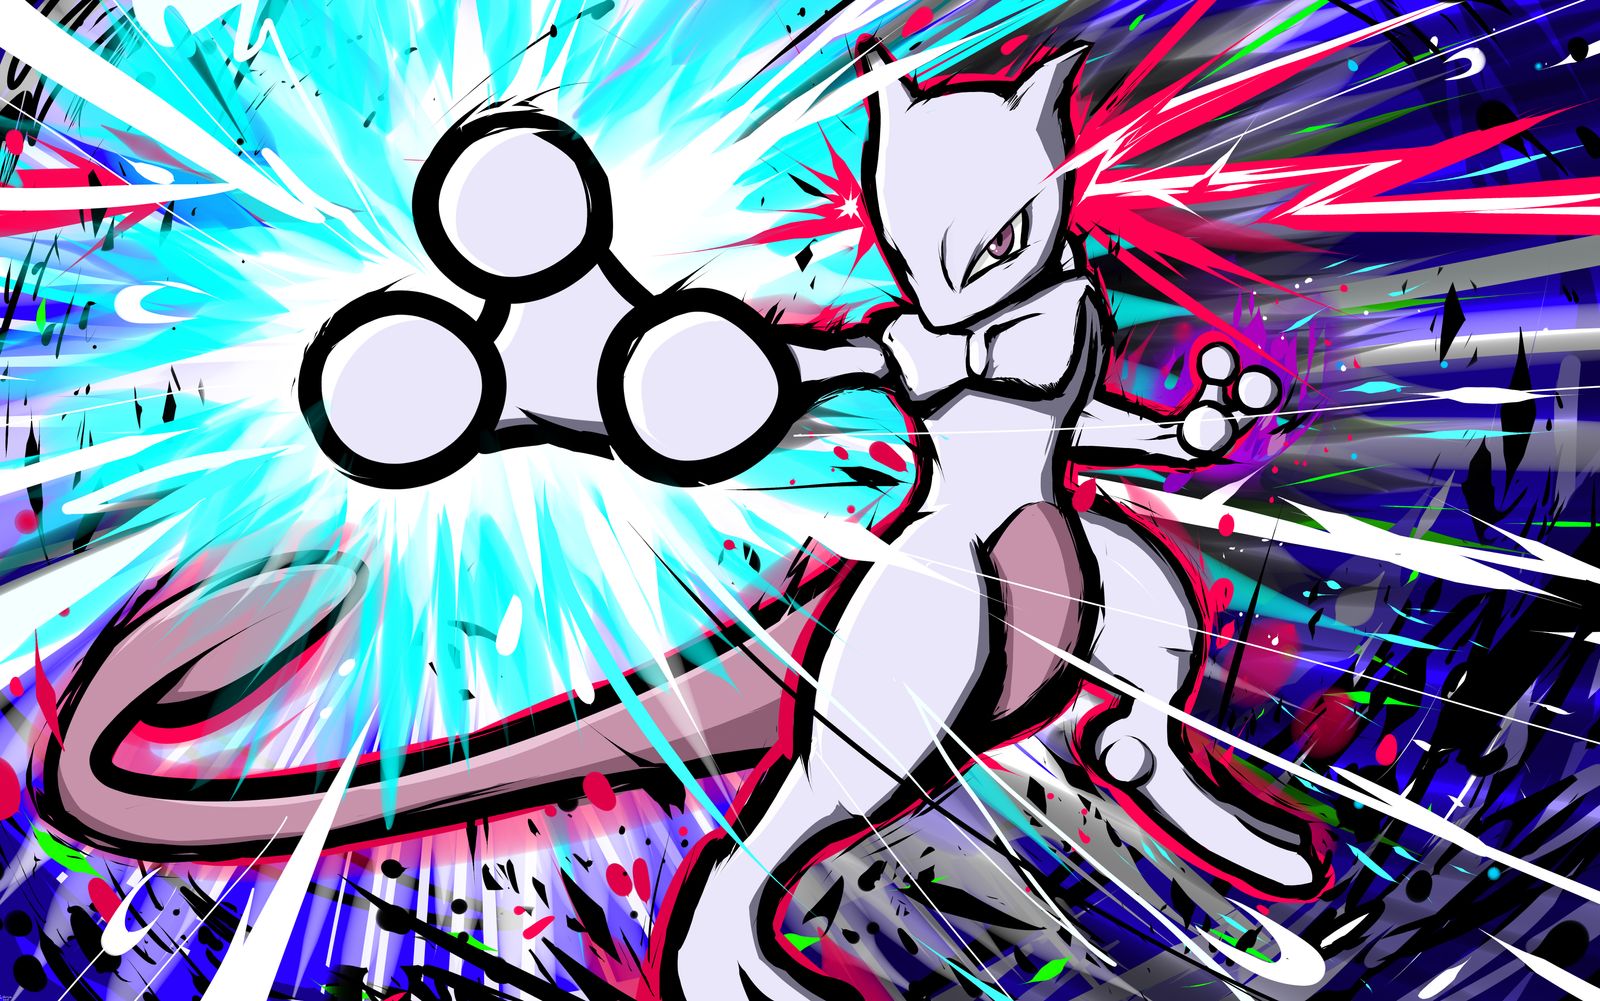 Armored Mewtwo Weakness, Counters For Pokemon GO Today - SlashGear